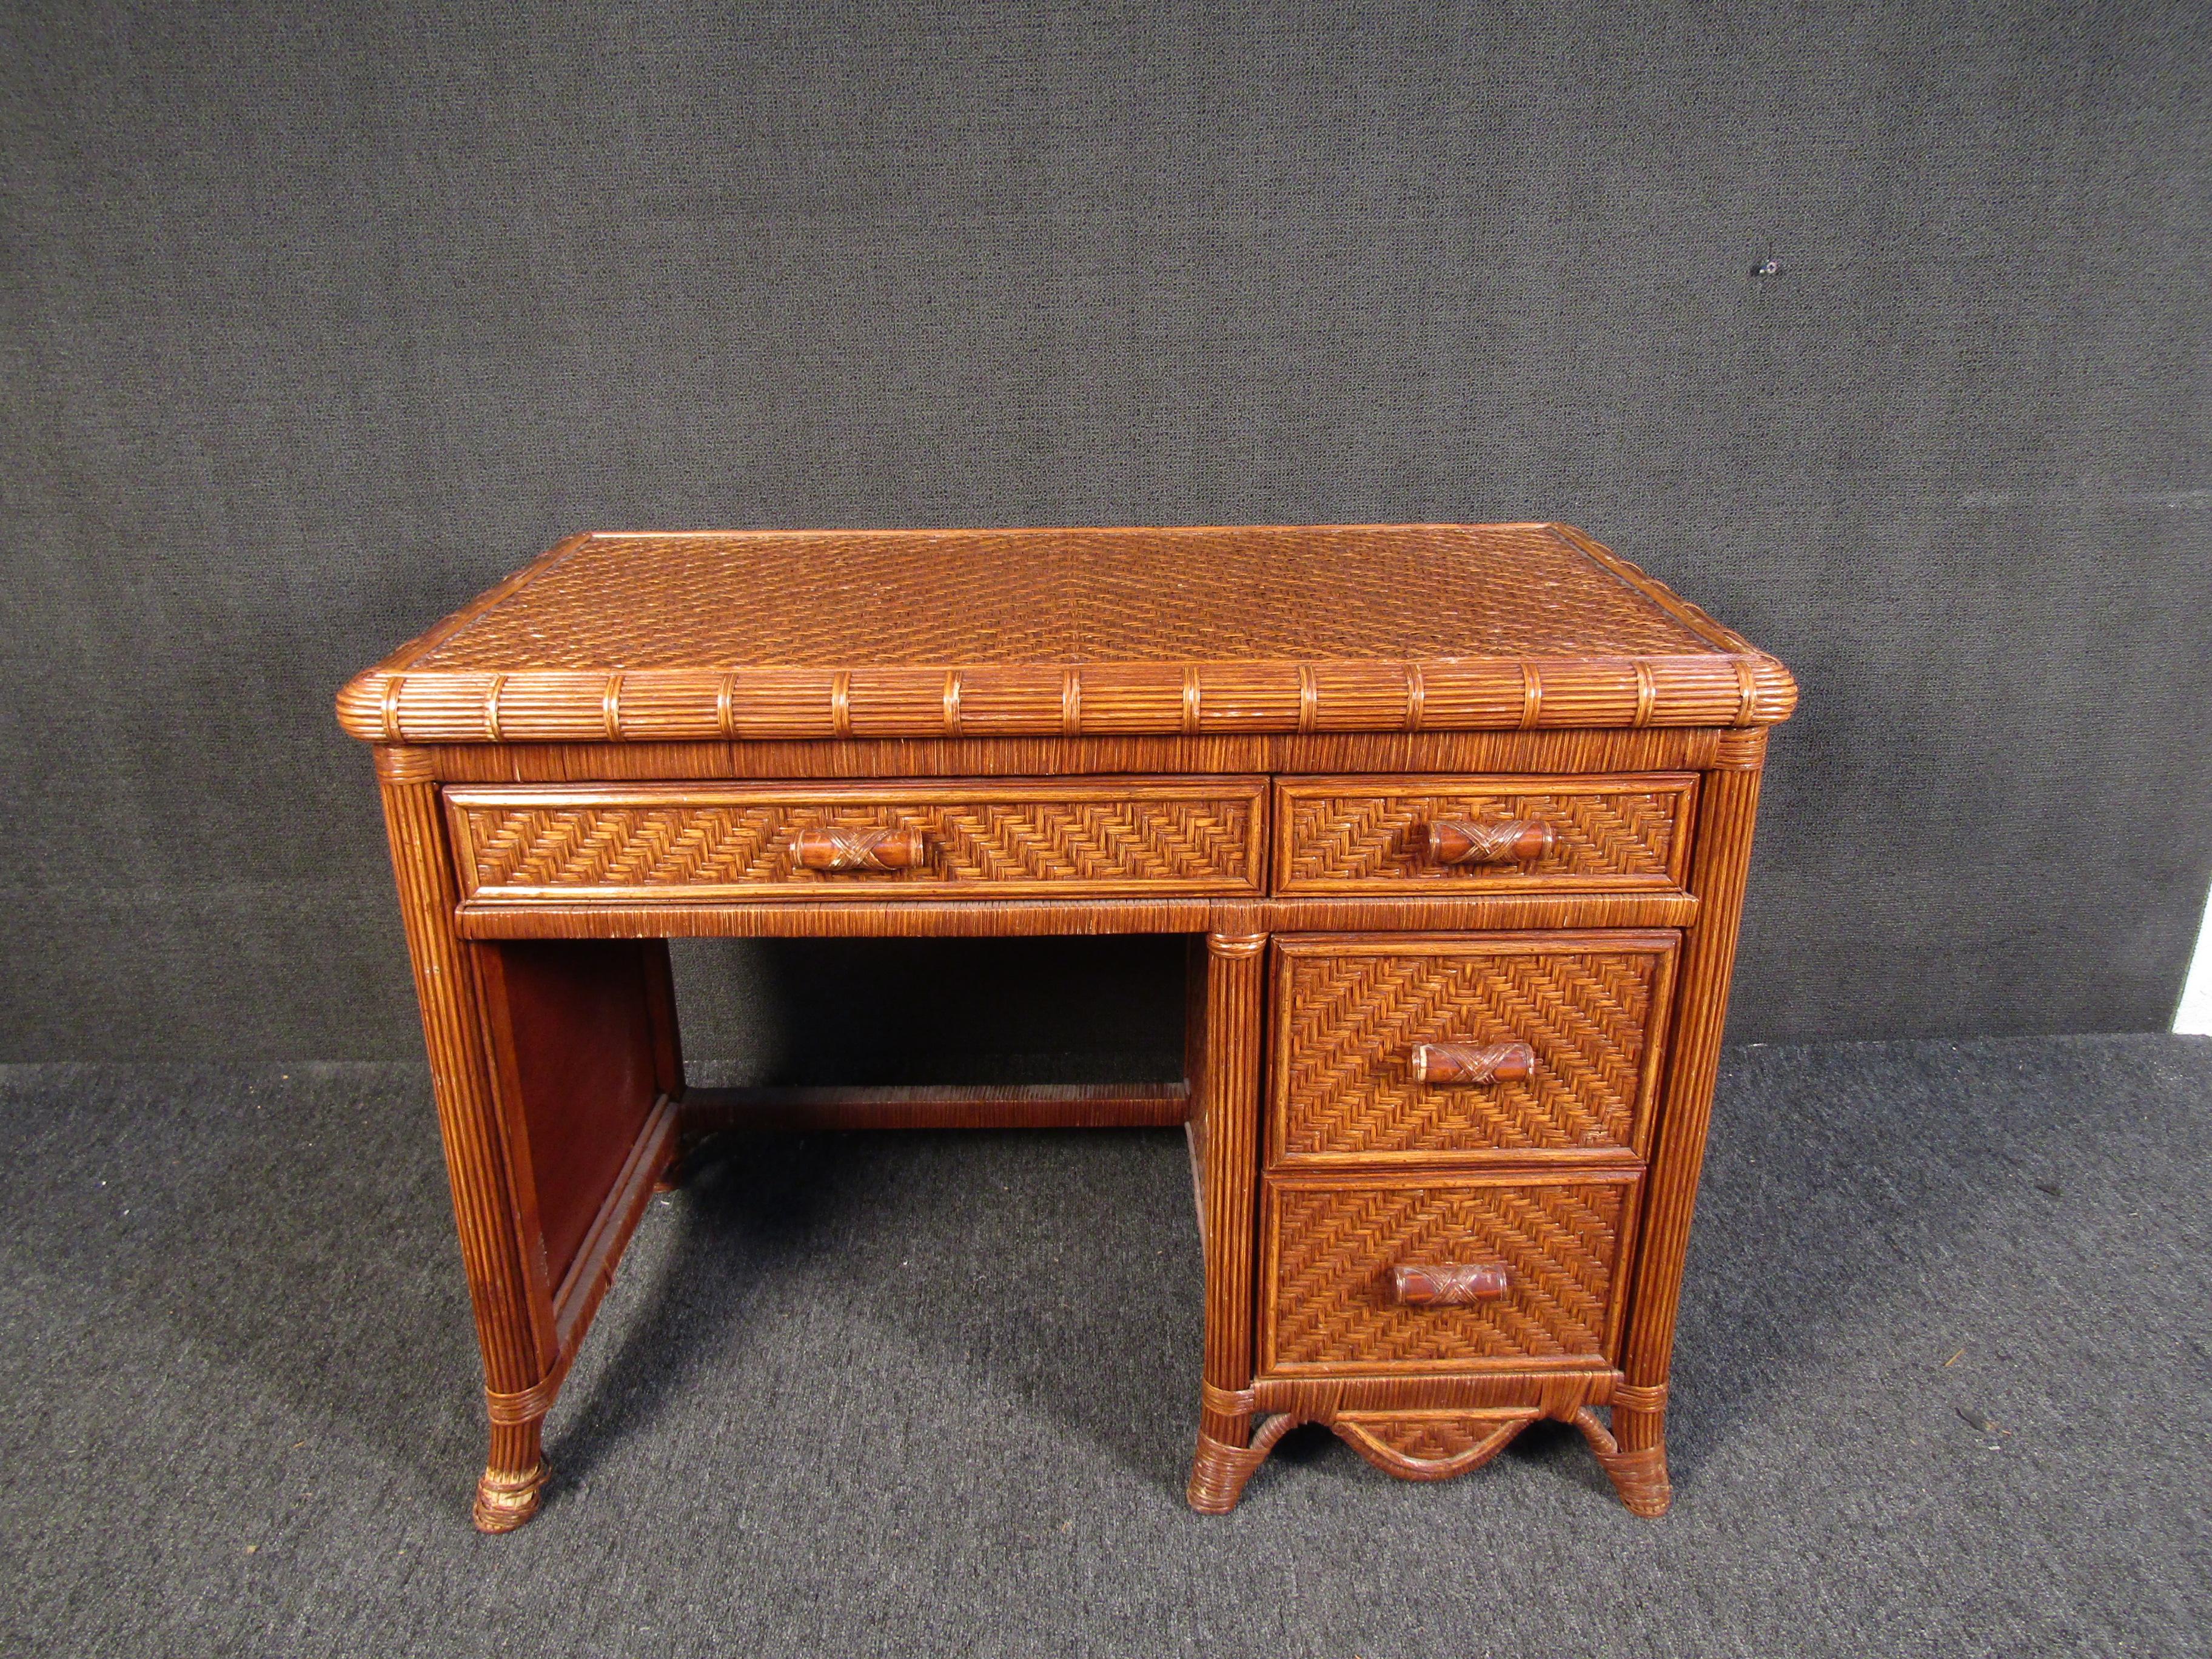 An unusual Mid-Century Modern desk made of bamboo and wicker, this small desk is sure to be a conversation-starter anywhere it's placed. Four drawers with beautiful woven fronts allow for storage and organization. Please confirm item location with